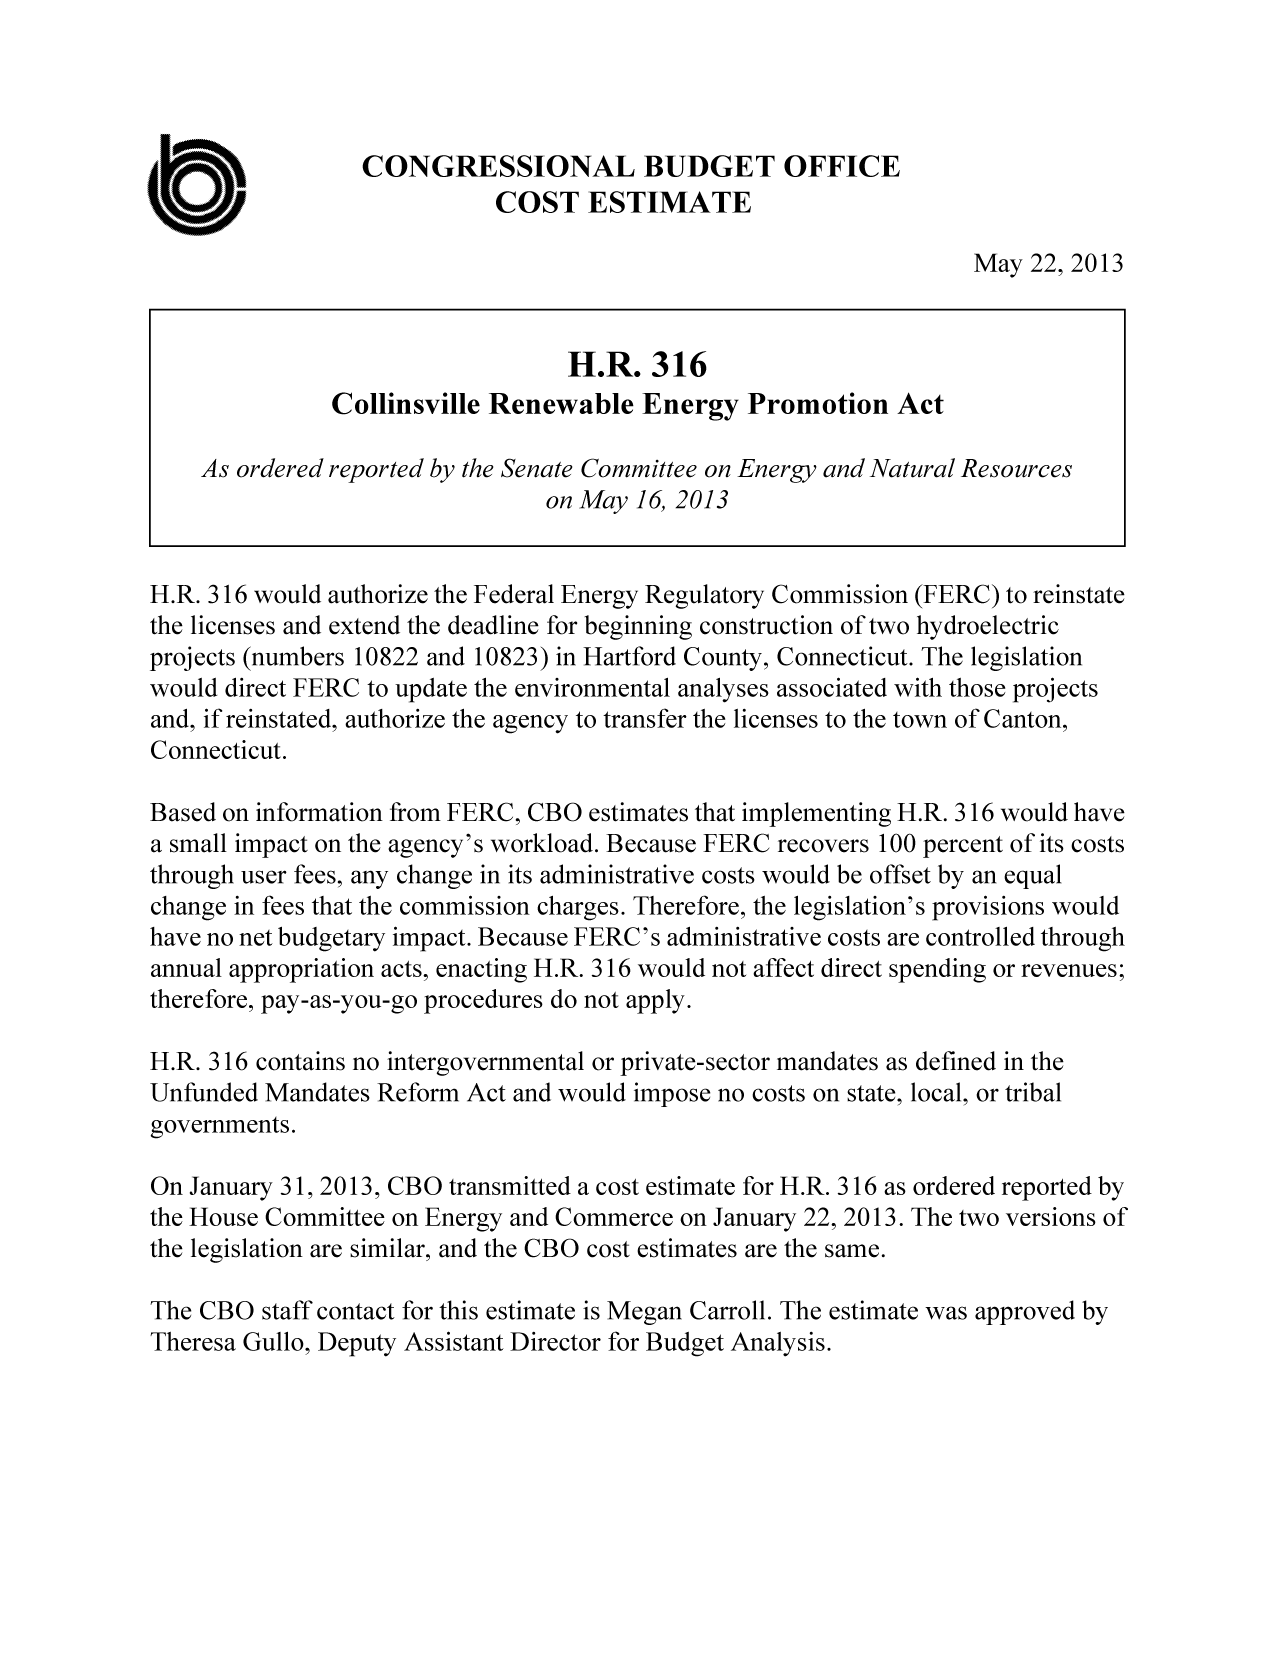 handle is hein.congrec/cbo11101 and id is 1 raw text is: CONGRESSIONAL BUDGET OFFICE
COST ESTIMATE
May 22, 2013
H.R. 316
Collinsville Renewable Energy Promotion Act
As ordered reported by the Senate Committee on Energy and Natural Resources
on May 16, 2013
H.R. 316 would authorize the Federal Energy Regulatory Commission (FERC) to reinstate
the licenses and extend the deadline for beginning construction of two hydroelectric
projects (numbers 10822 and 10823) in Hartford County, Connecticut. The legislation
would direct FERC to update the environmental analyses associated with those projects
and, if reinstated, authorize the agency to transfer the licenses to the town of Canton,
Connecticut.
Based on information from FERC, CBO estimates that implementing H.R. 316 would have
a small impact on the agency's workload. Because FERC recovers 100 percent of its costs
through user fees, any change in its administrative costs would be offset by an equal
change in fees that the commission charges. Therefore, the legislation's provisions would
have no net budgetary impact. Because FERC's administrative costs are controlled through
annual appropriation acts, enacting H.R. 316 would not affect direct spending or revenues;
therefore, pay-as-you-go procedures do not apply.
H.R. 316 contains no intergovernmental or private-sector mandates as defined in the
Unfunded Mandates Reform Act and would impose no costs on state, local, or tribal
governments.
On January 31, 2013, CBO transmitted a cost estimate for H.R. 316 as ordered reported by
the House Committee on Energy and Commerce on January 22, 2013. The two versions of
the legislation are similar, and the CBO cost estimates are the same.
The CBO staff contact for this estimate is Megan Carroll. The estimate was approved by
Theresa Gullo, Deputy Assistant Director for Budget Analysis.


